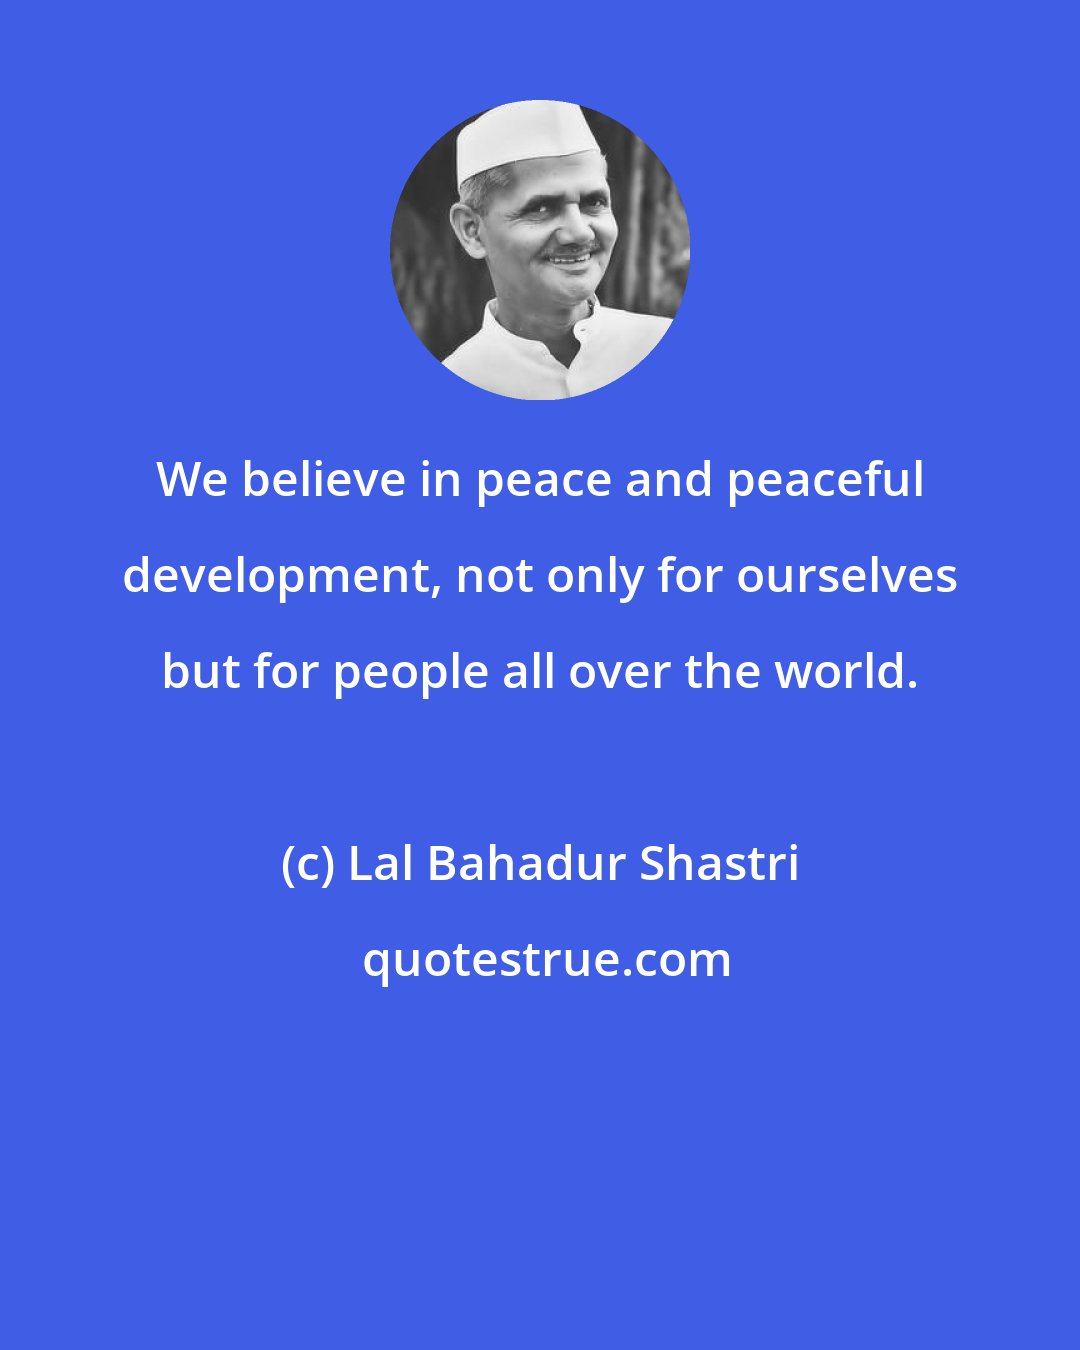 Lal Bahadur Shastri: We believe in peace and peaceful development, not only for ourselves but for people all over the world.